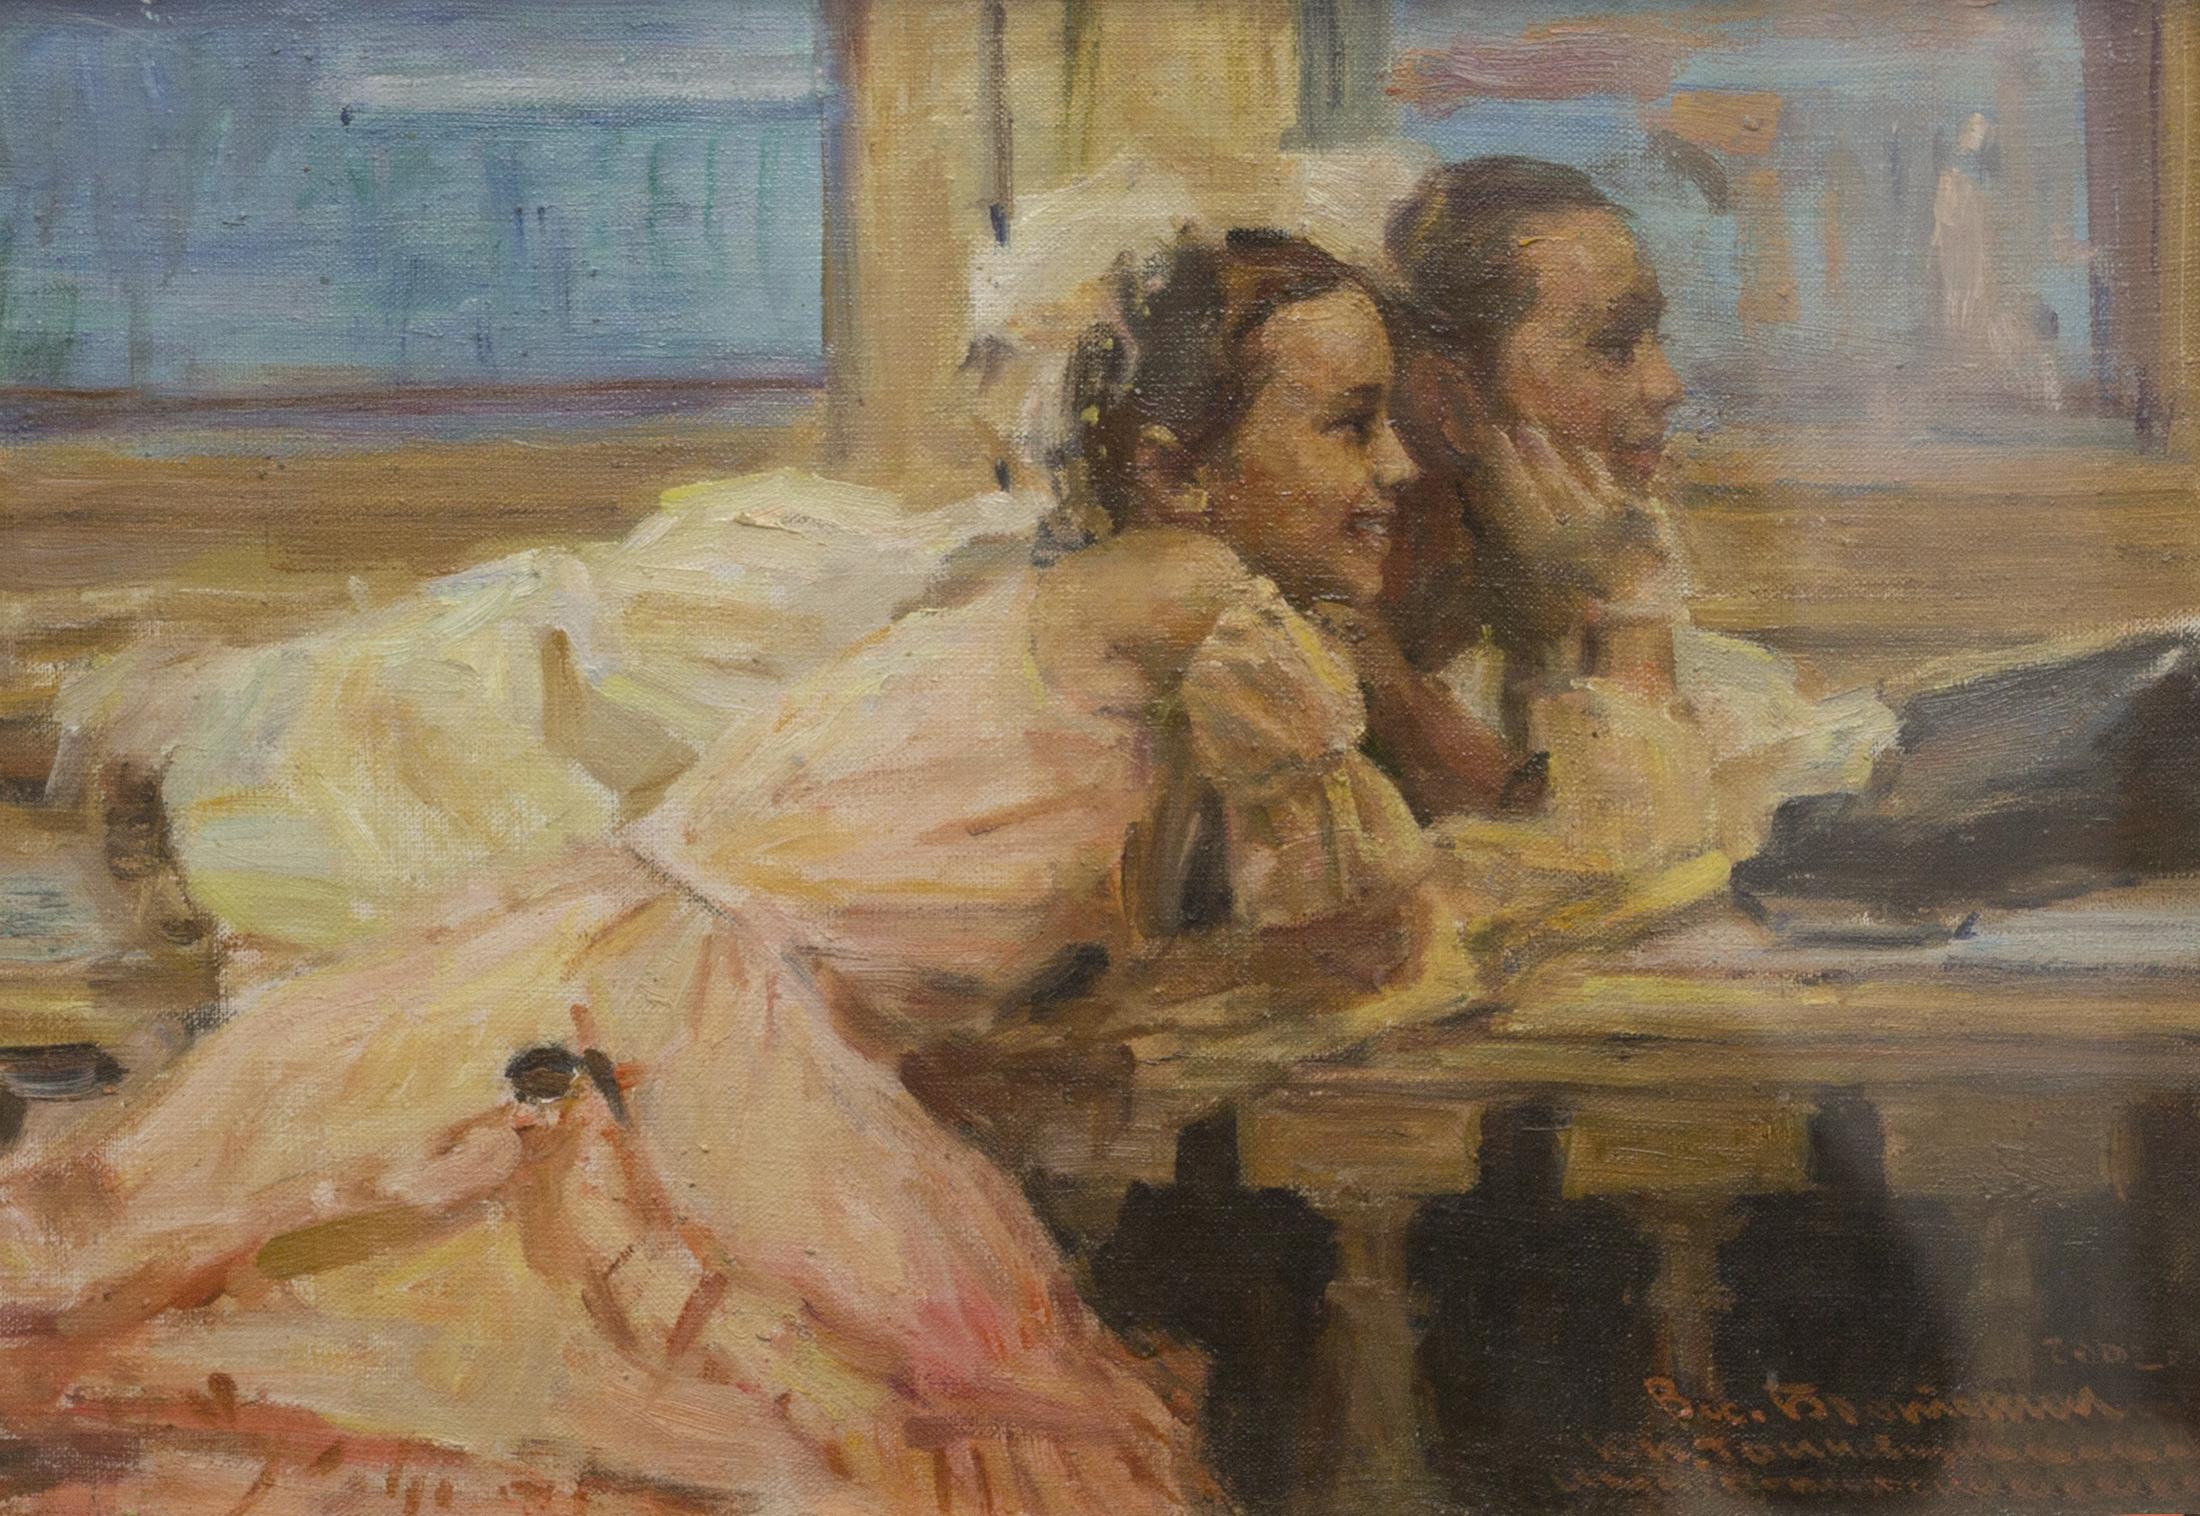 Young dancers O. Pavlova and A. Levkina as imperials children. Original modern art painting